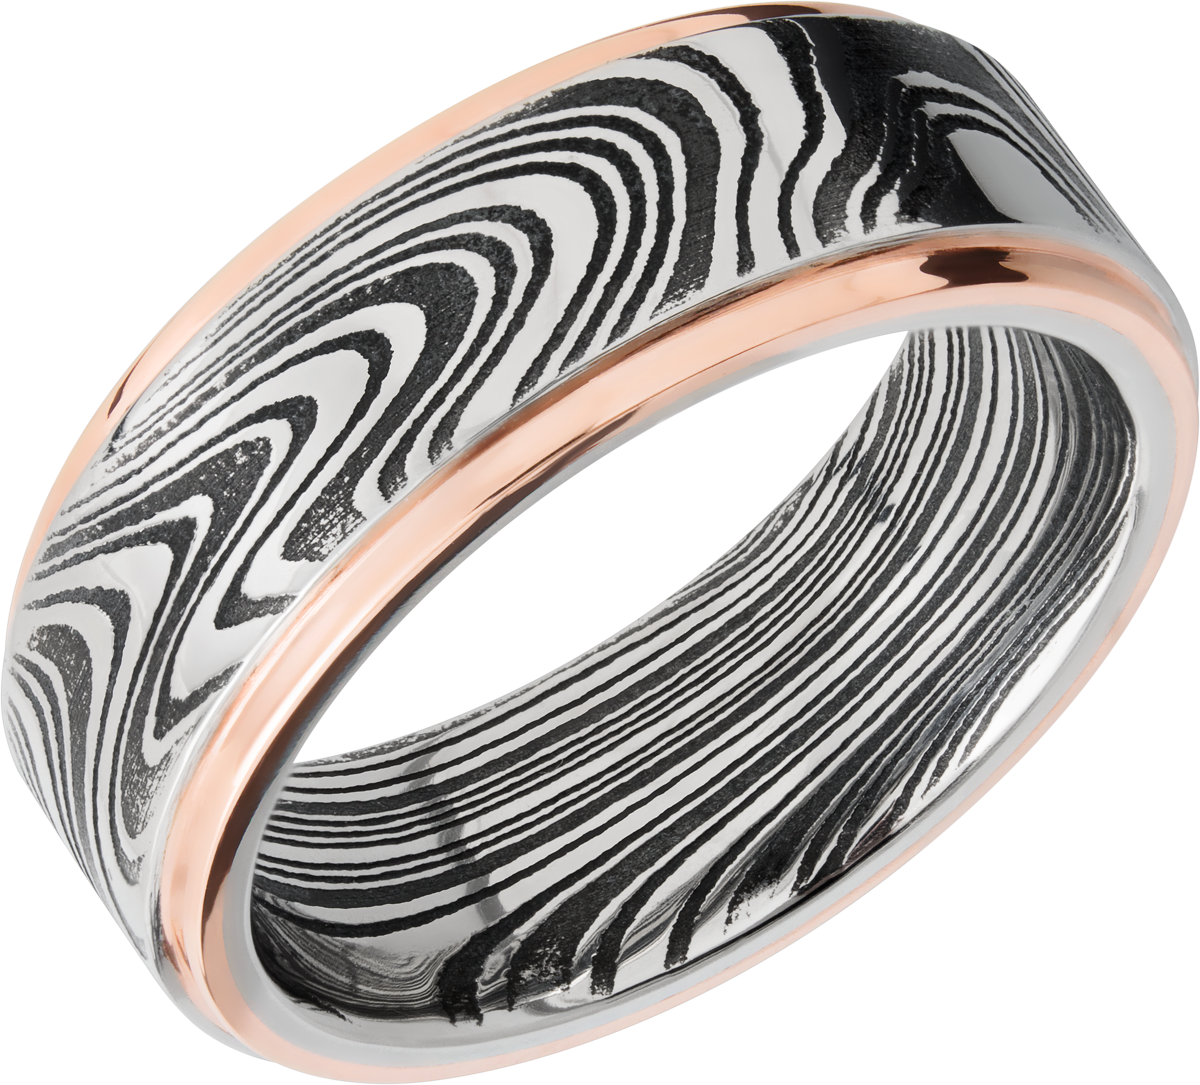 Damascus steel 7mm flat band with grooved edges, each edge has 1mm inlay of 14k rose gold.  Acid/Po